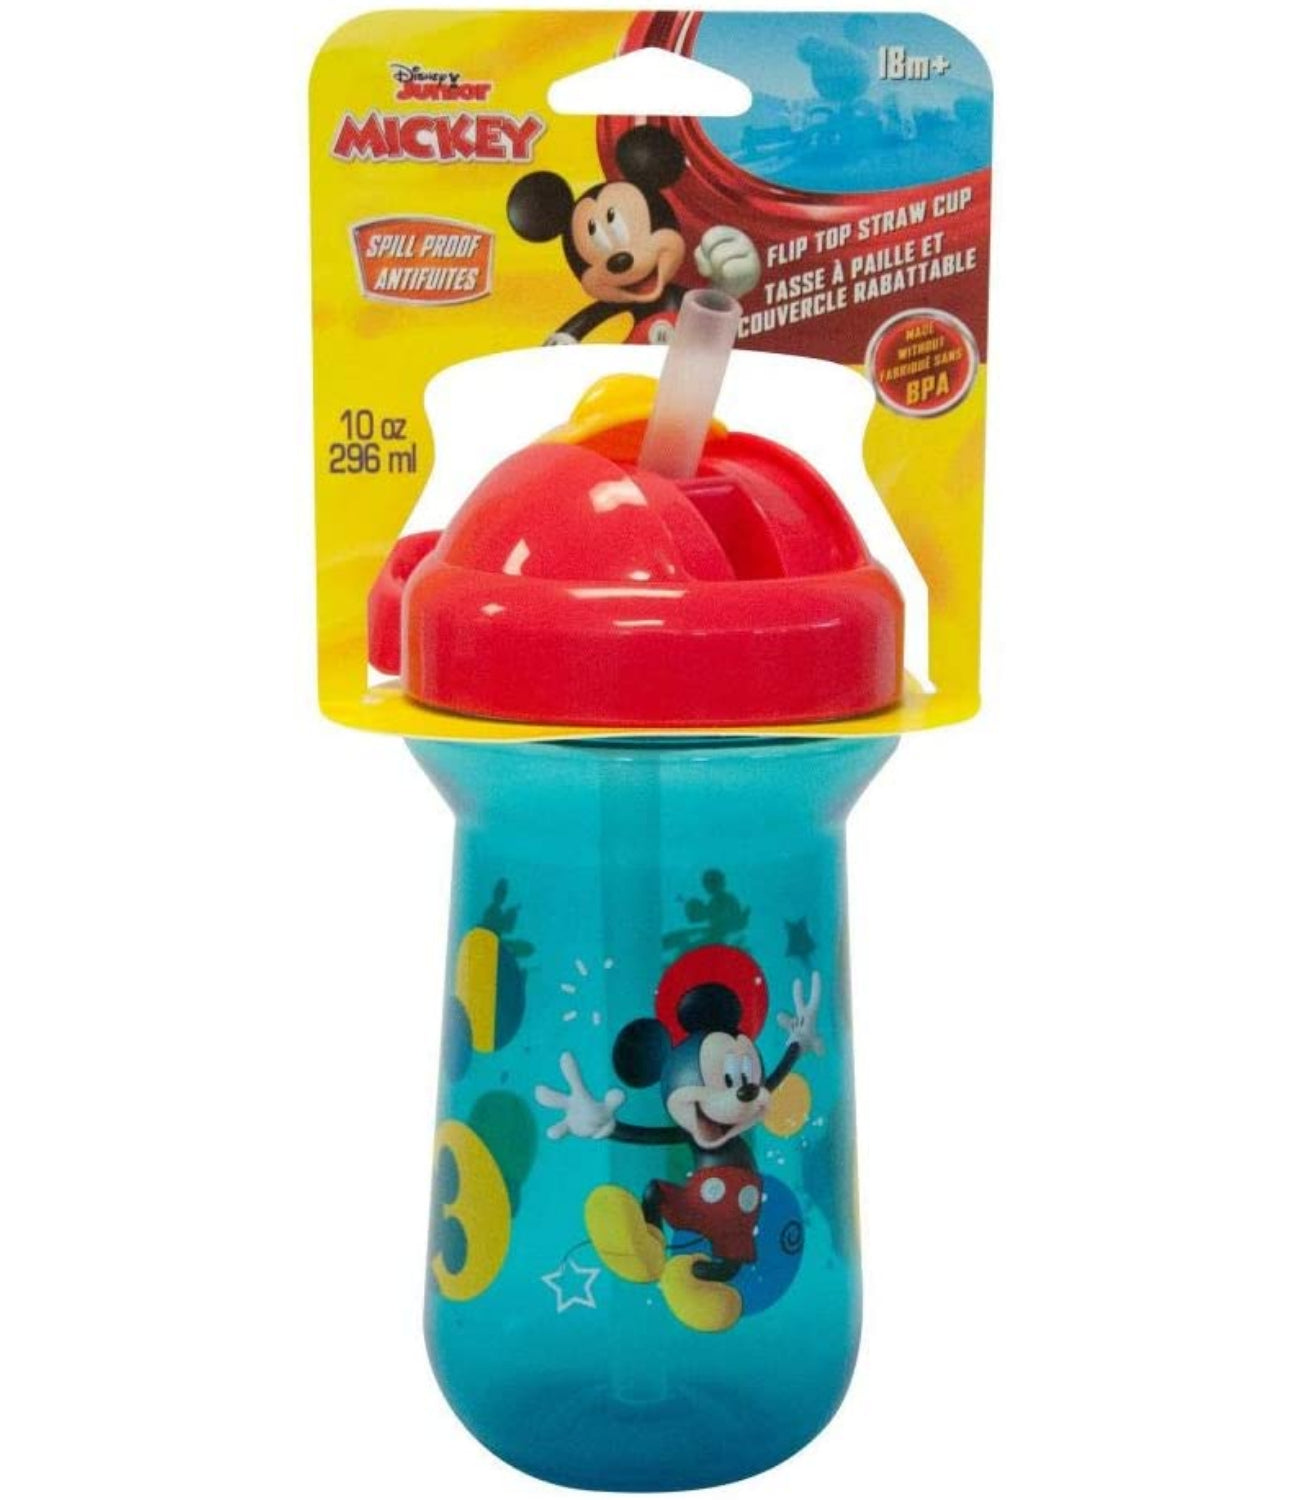 The First Years Disney Mickey Mouse Toddler Straw Cups - Disney Toddler Cups with Name Tag Charm - 18 Months and Up - 10 oz - 2 Count